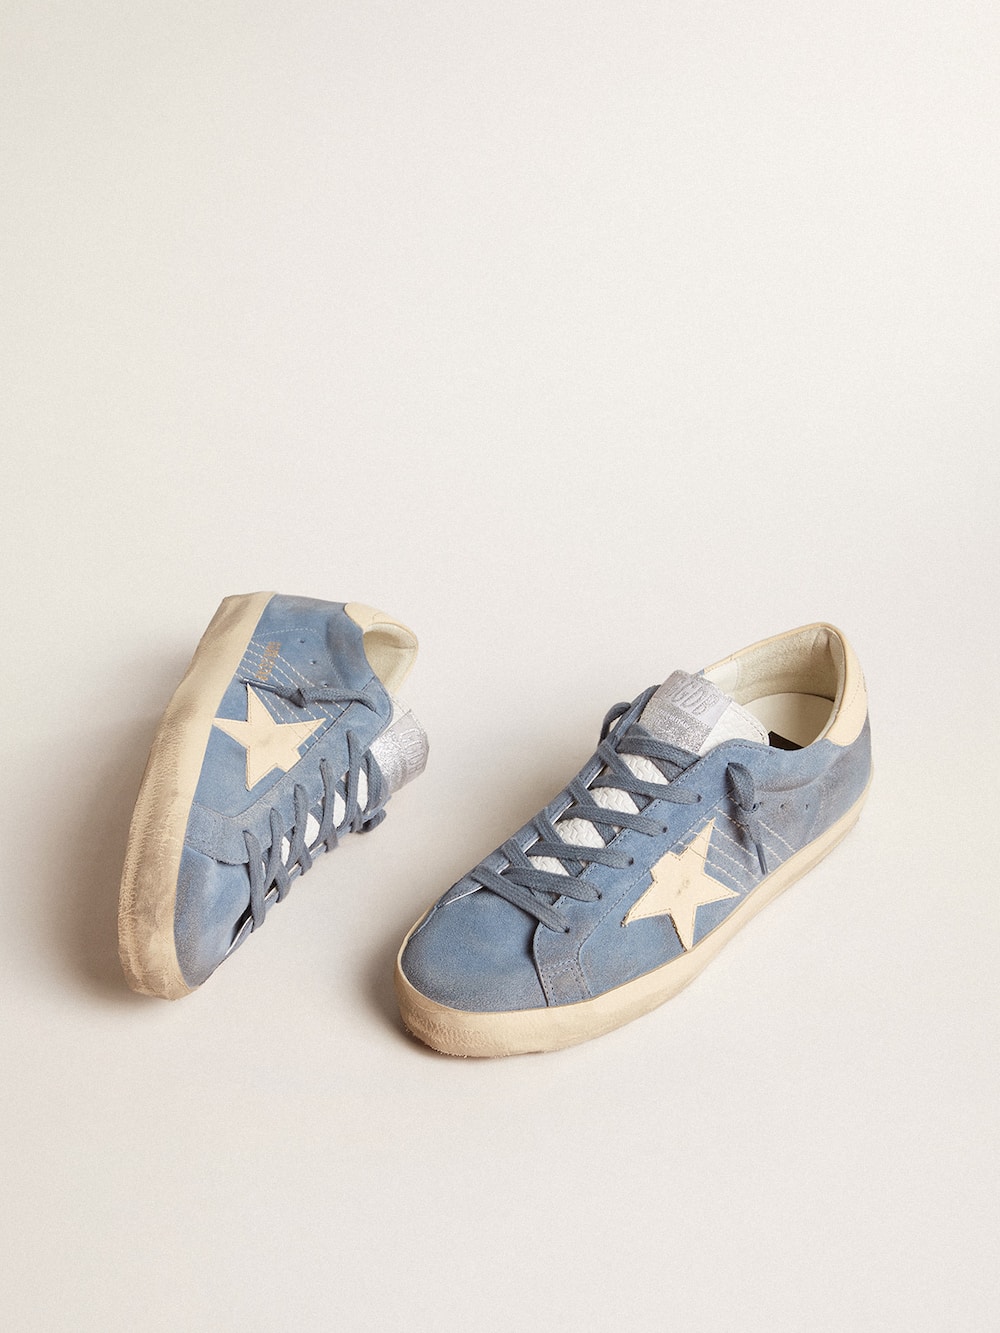 Golden Goose - Super-Star in light blue suede with beige leather star and heel tab in 